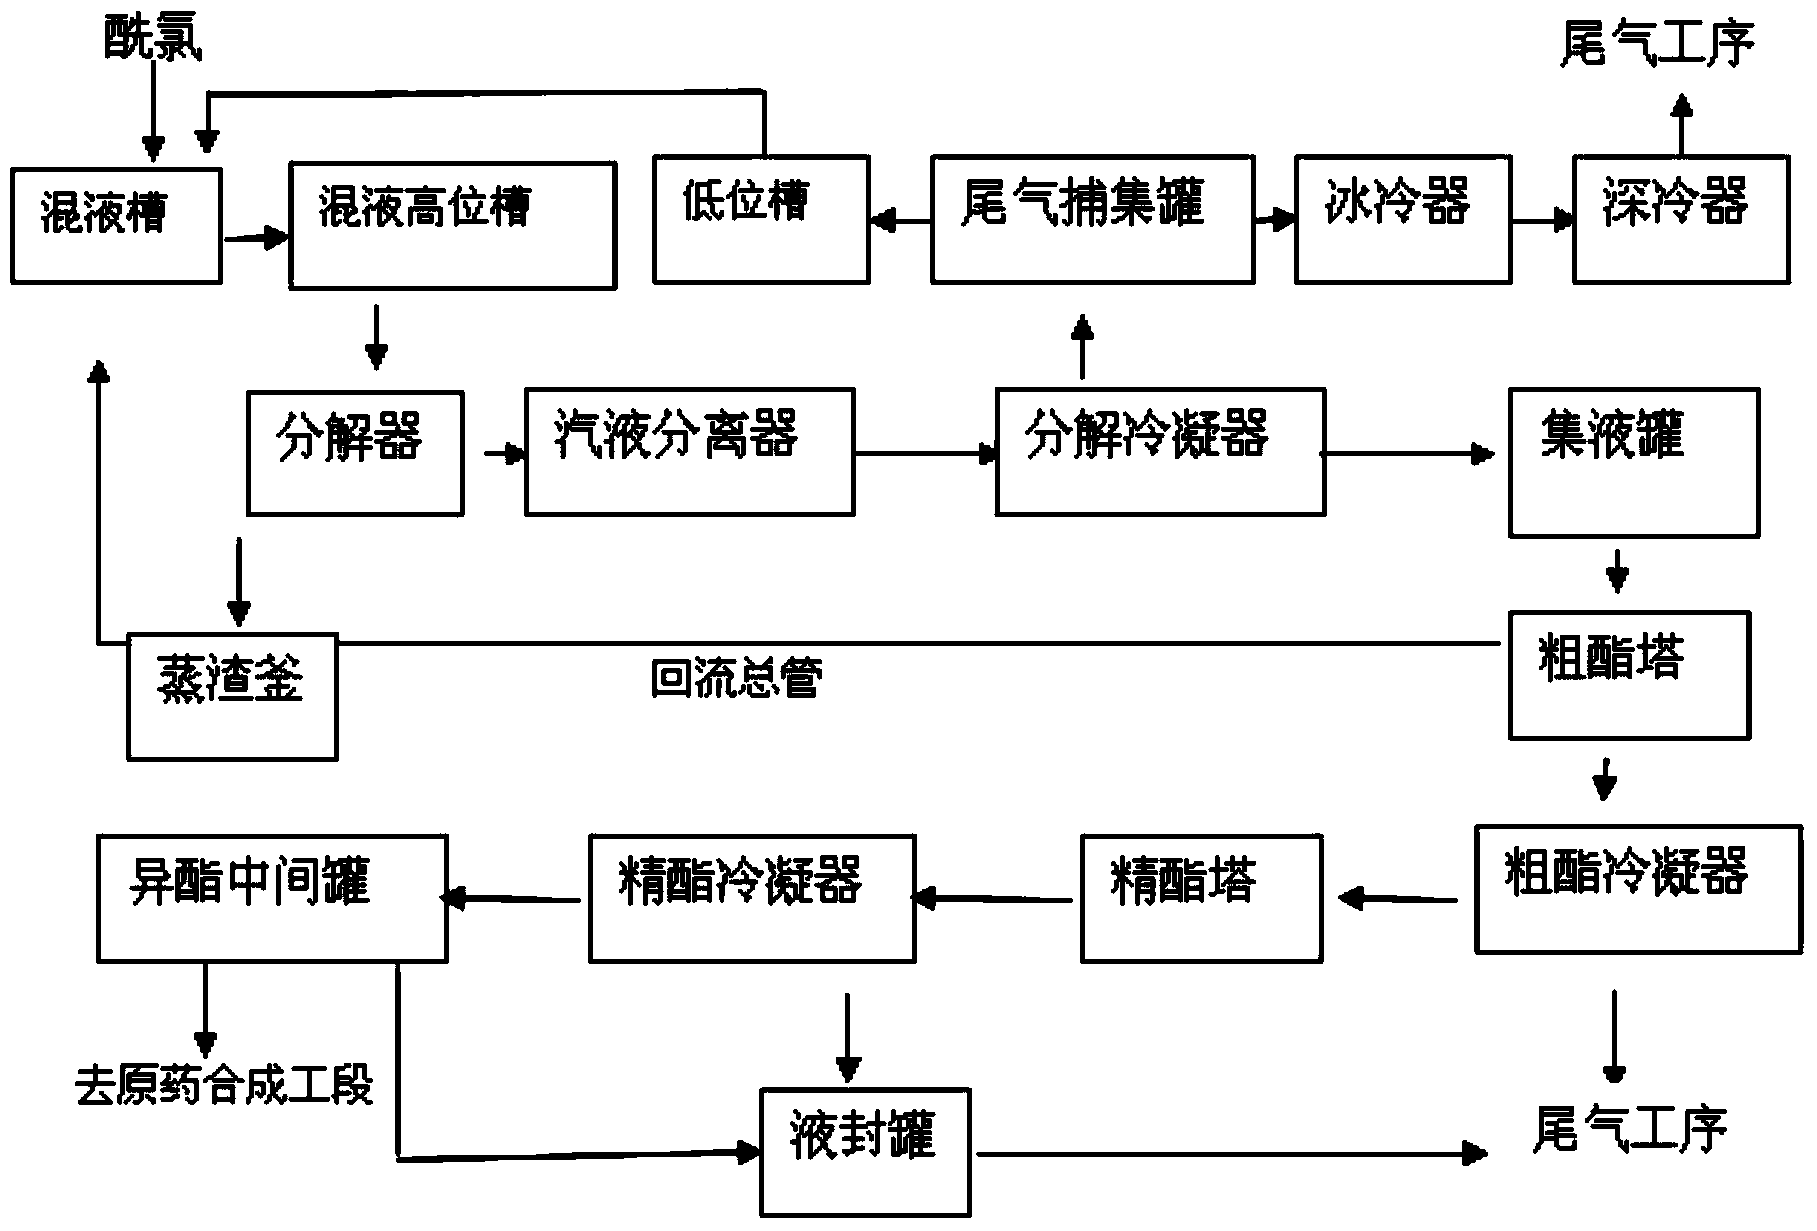 Production method and equipment of methyl isocyanate